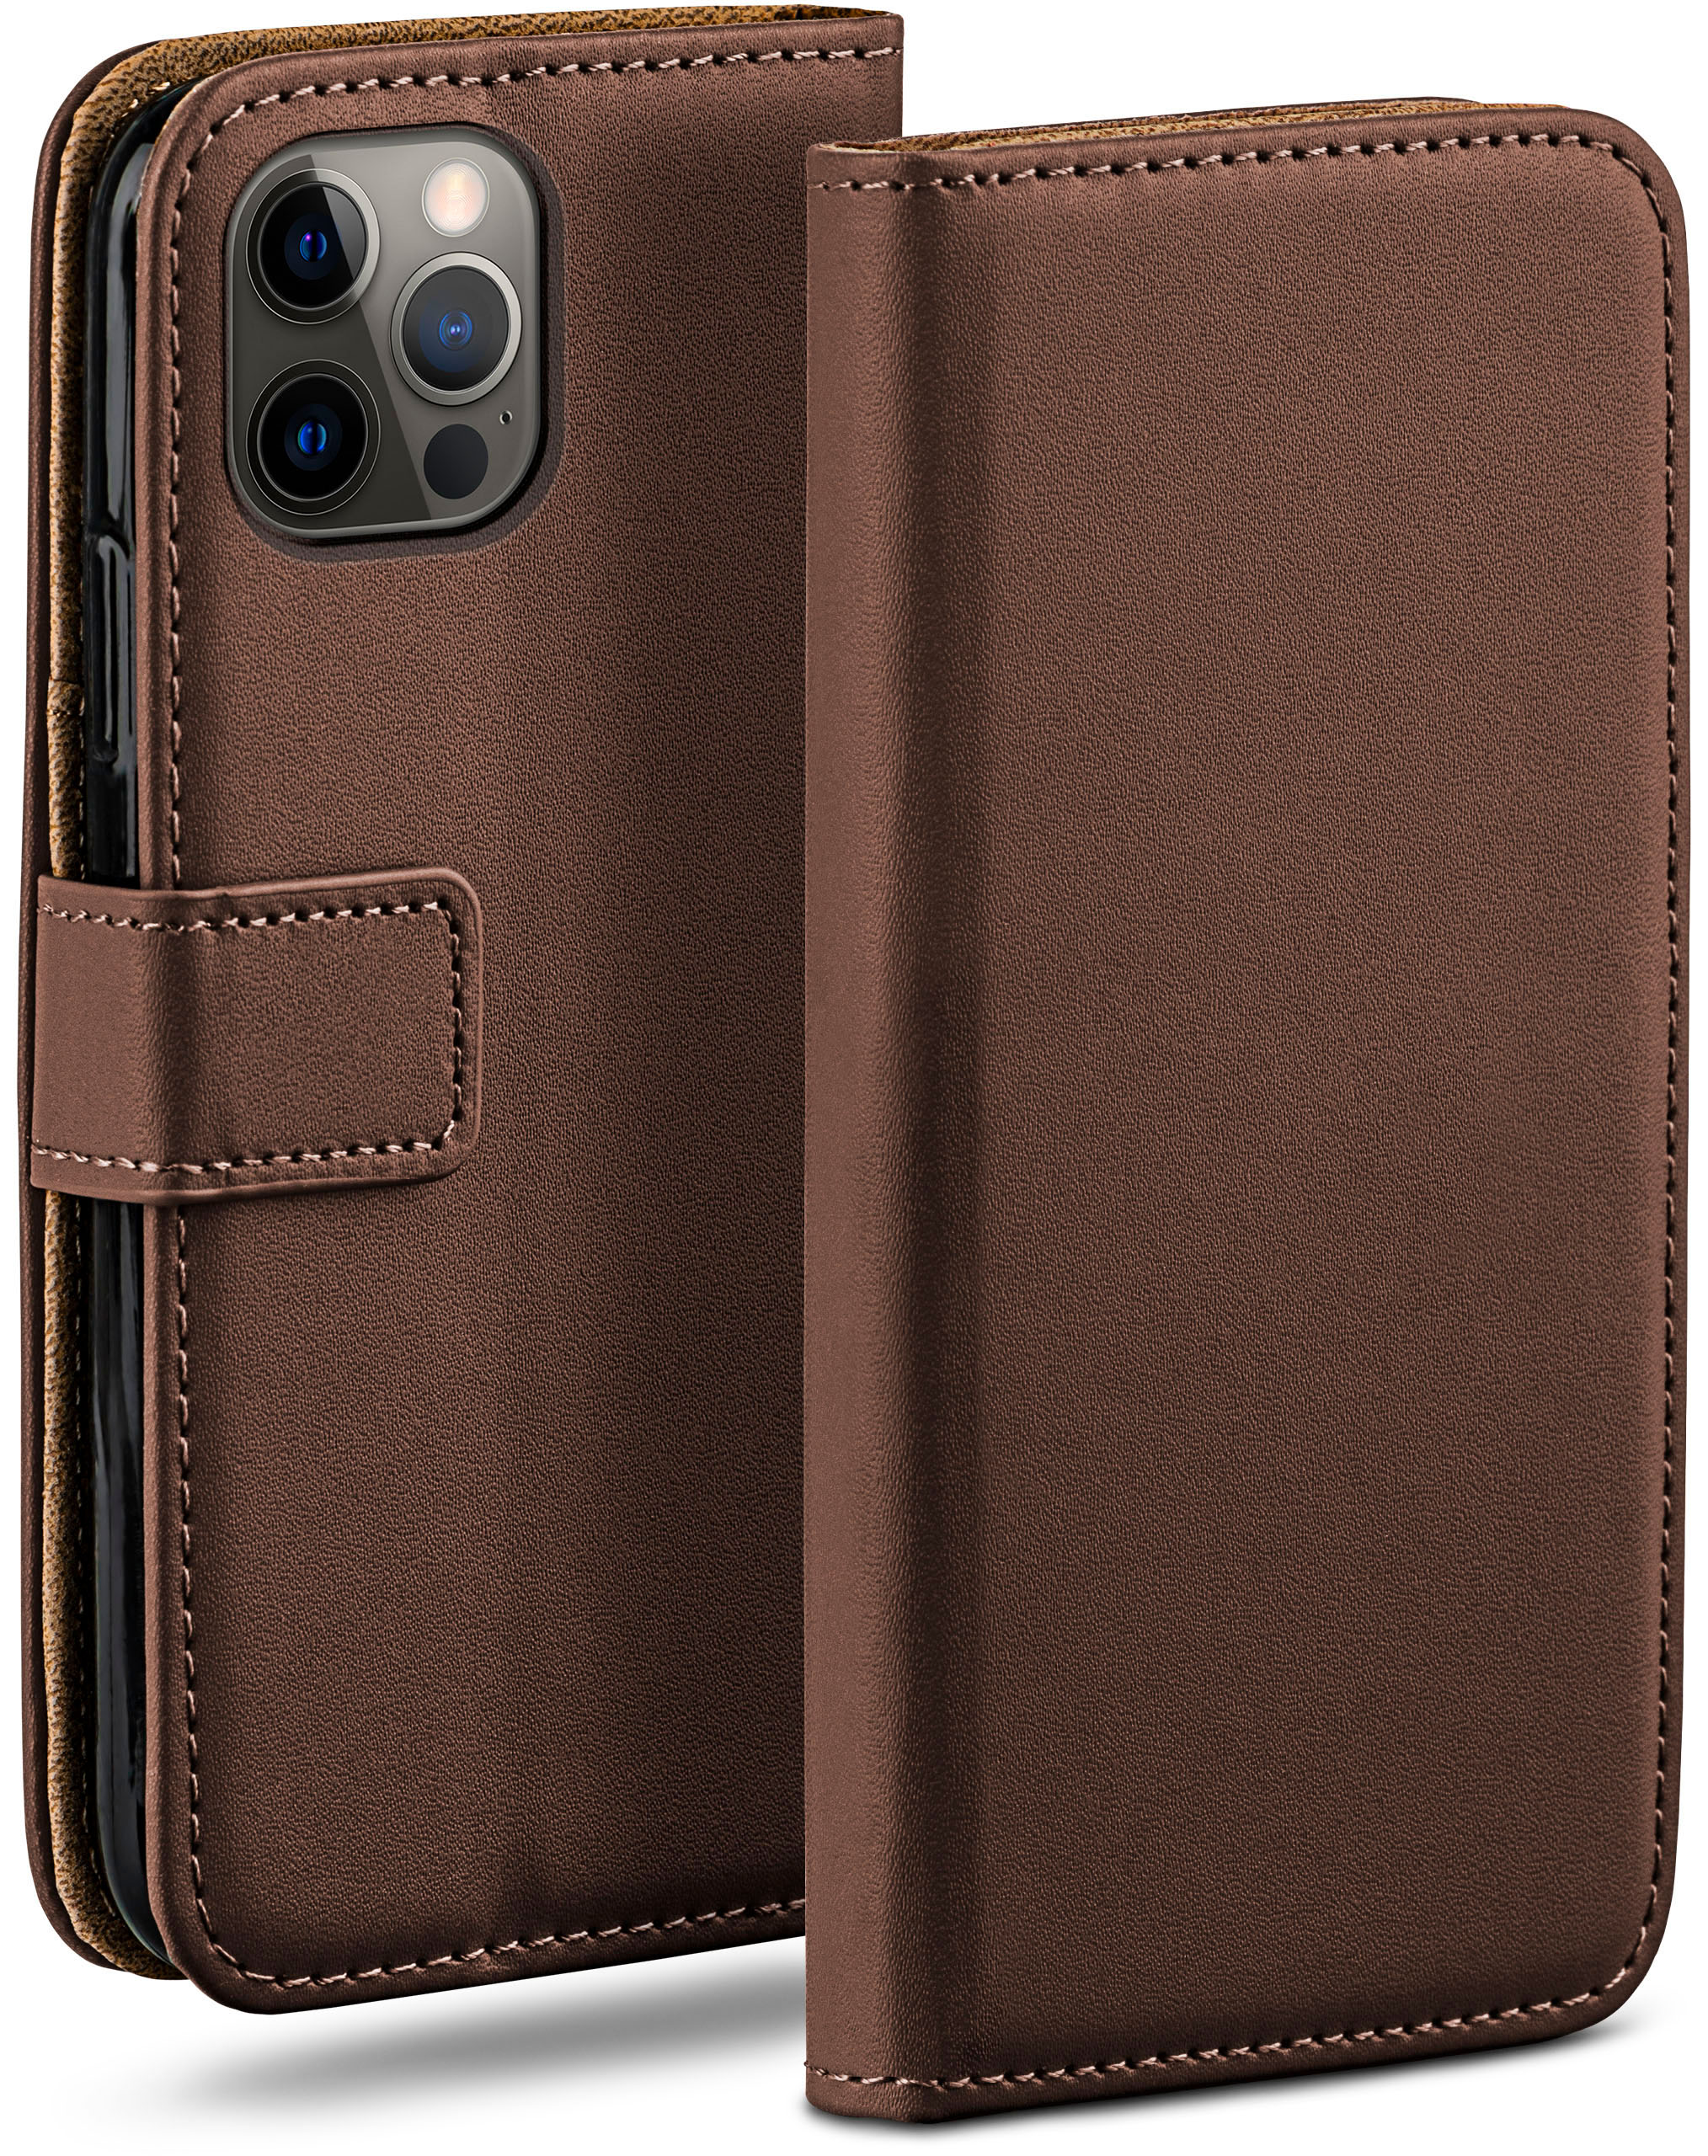 MOEX Book Case, Apple, 12 Oxide-Brown Bookcover, iPhone Pro